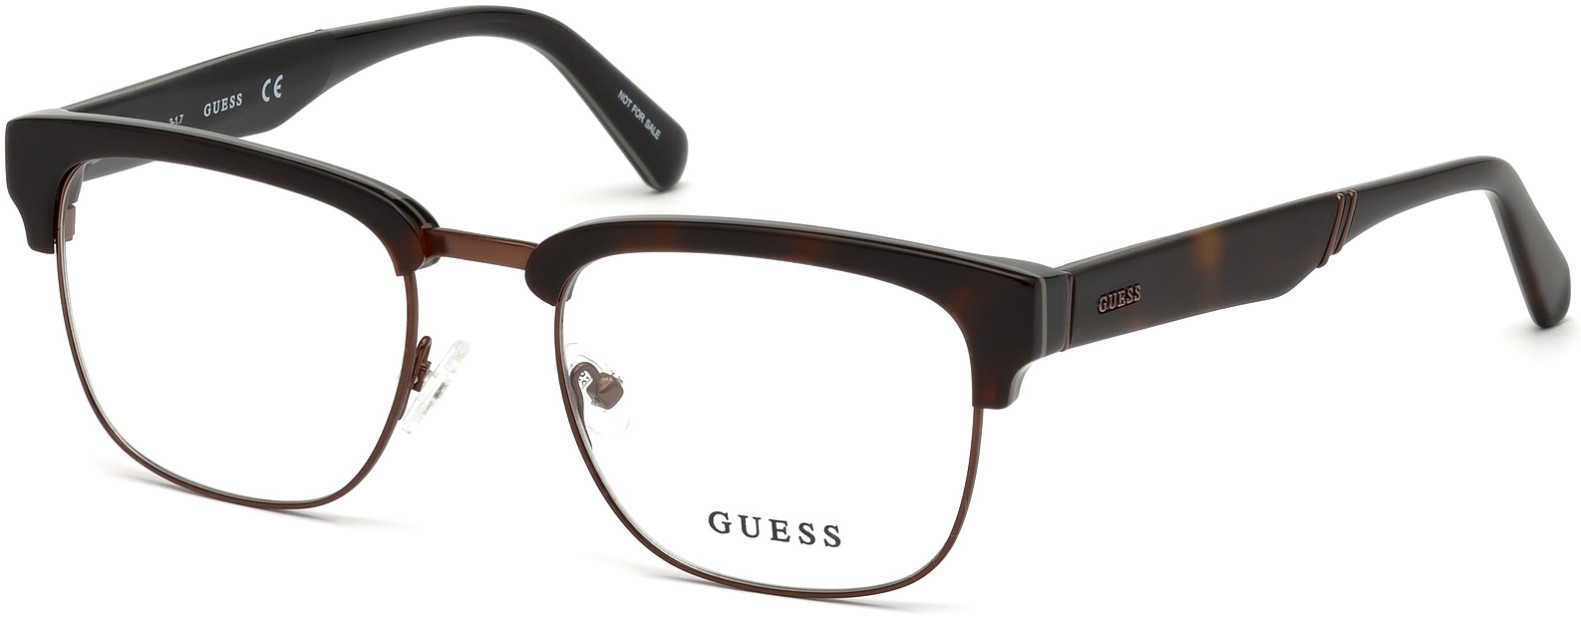 GUESS 1942 052